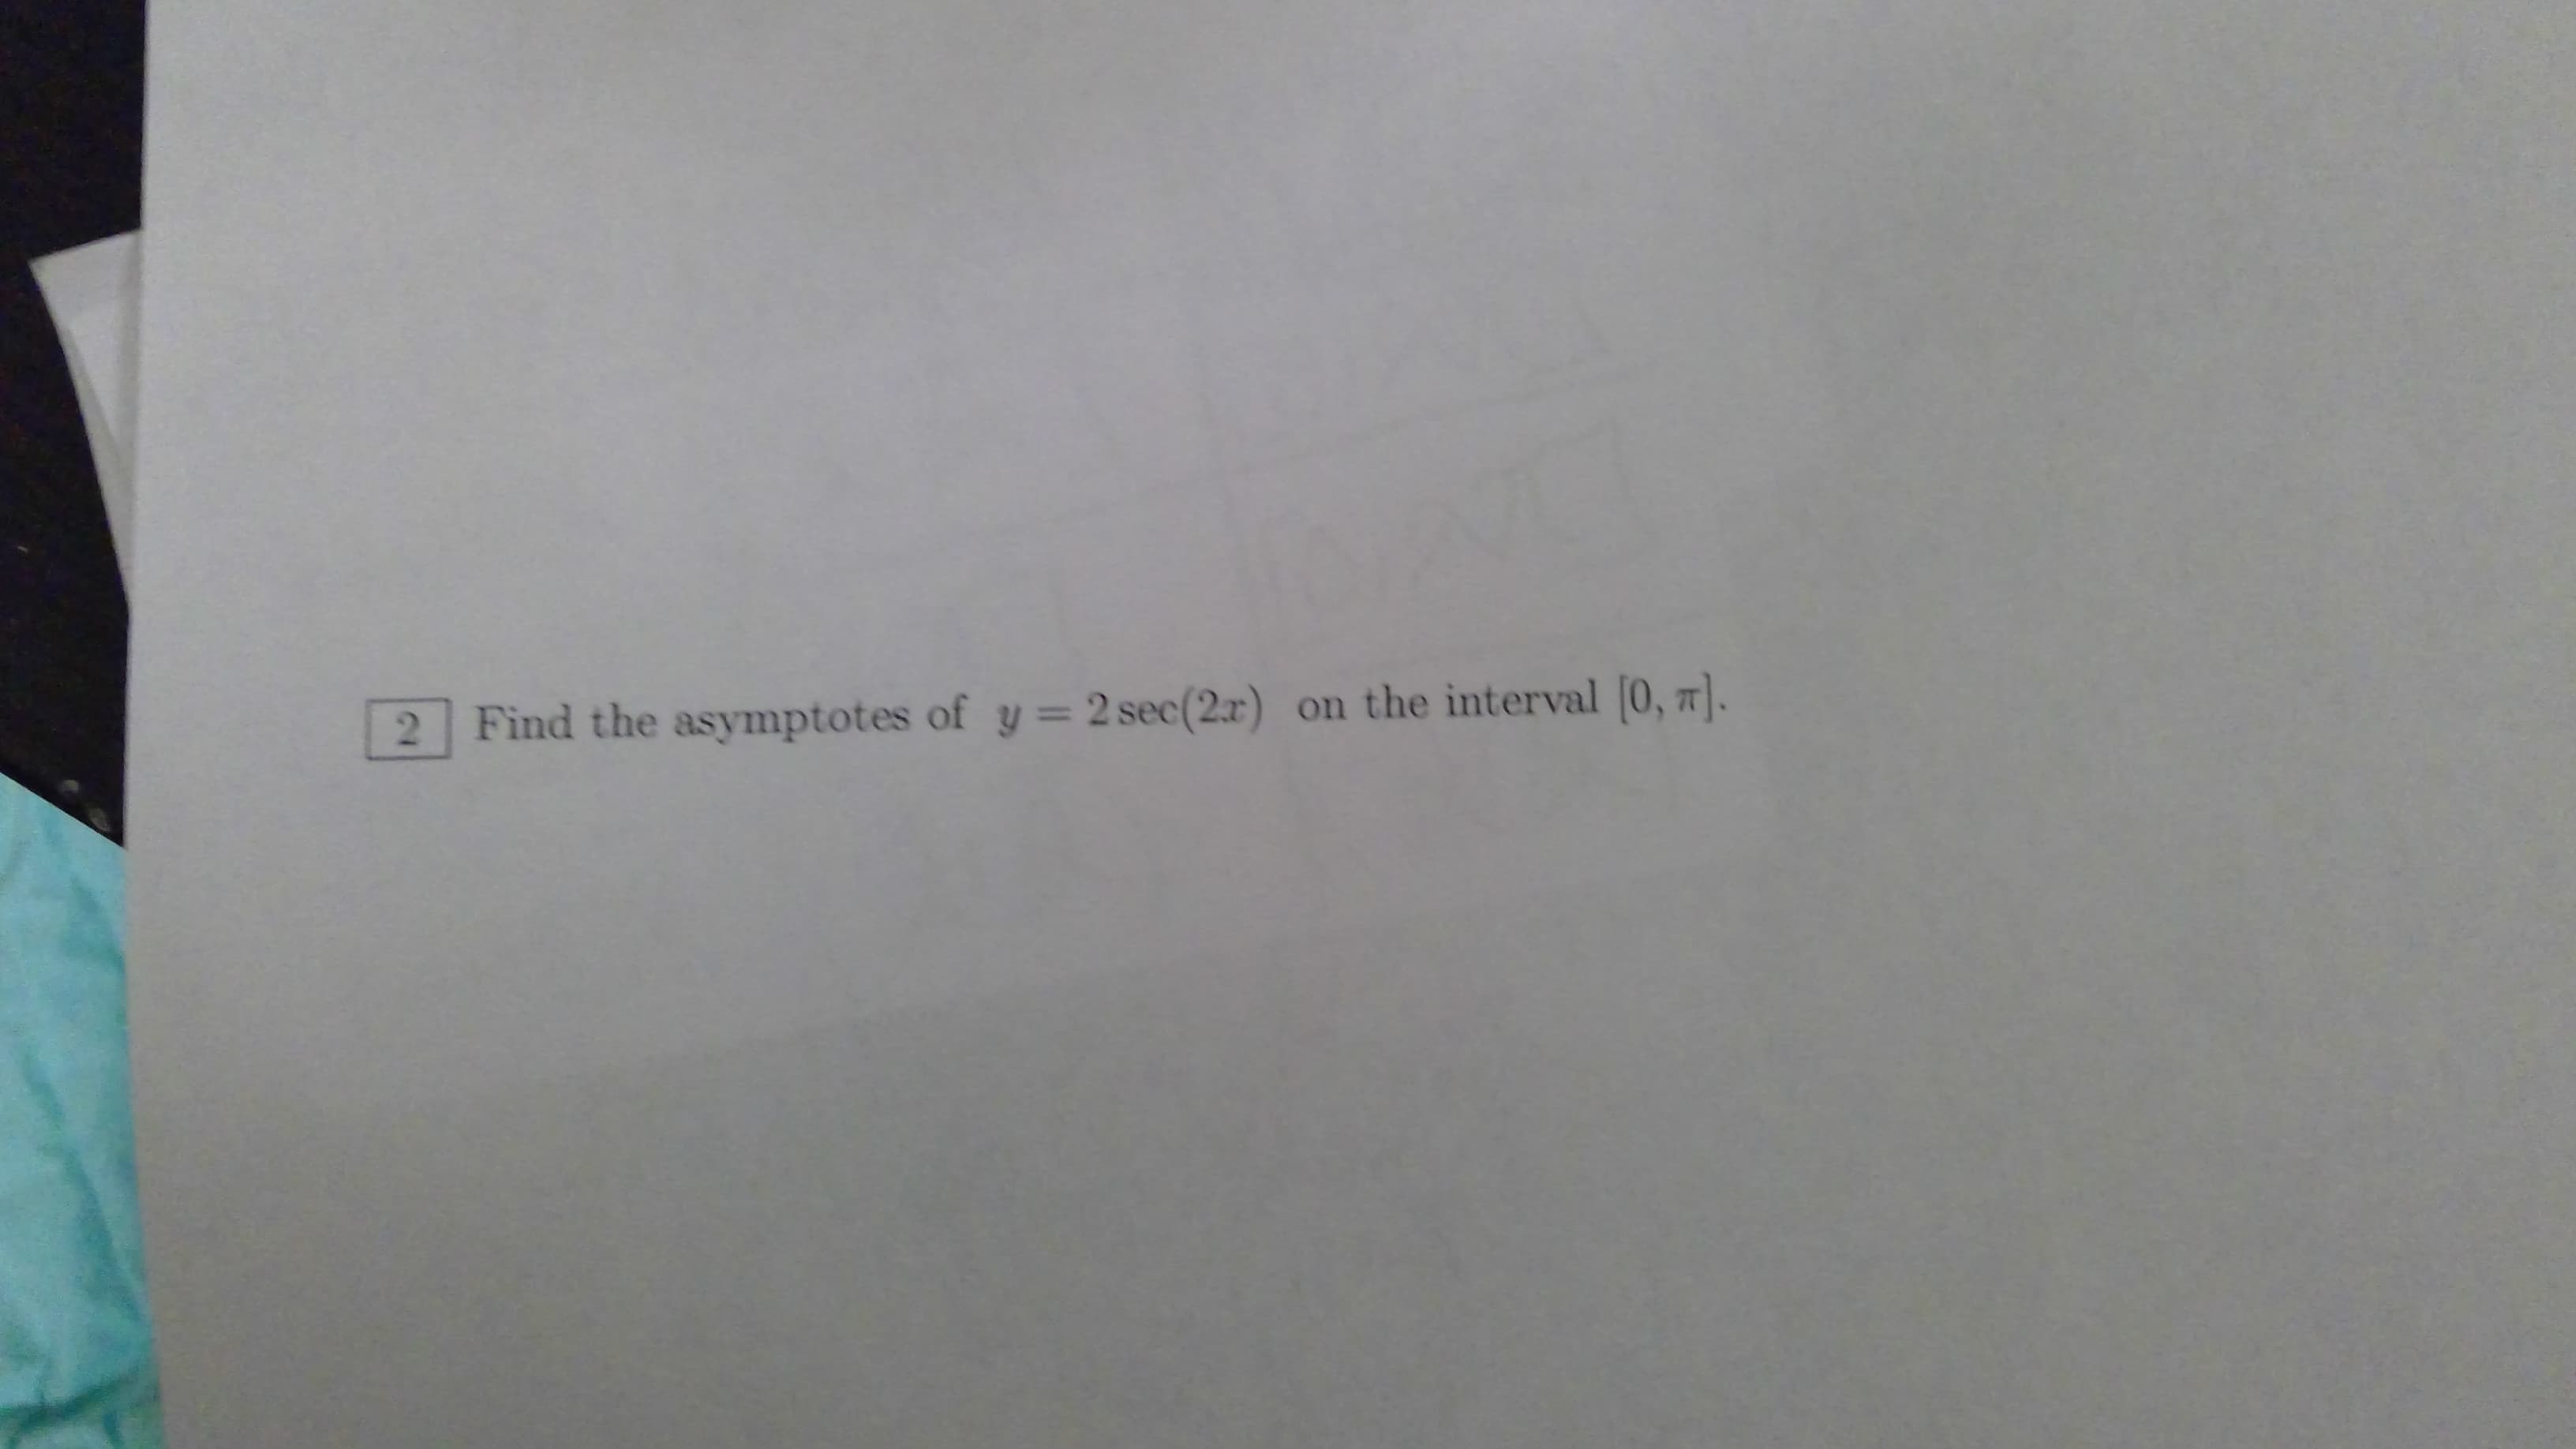 2 Find the asymptotes of y = 2 sec(2r) on the interval [0, 7].
